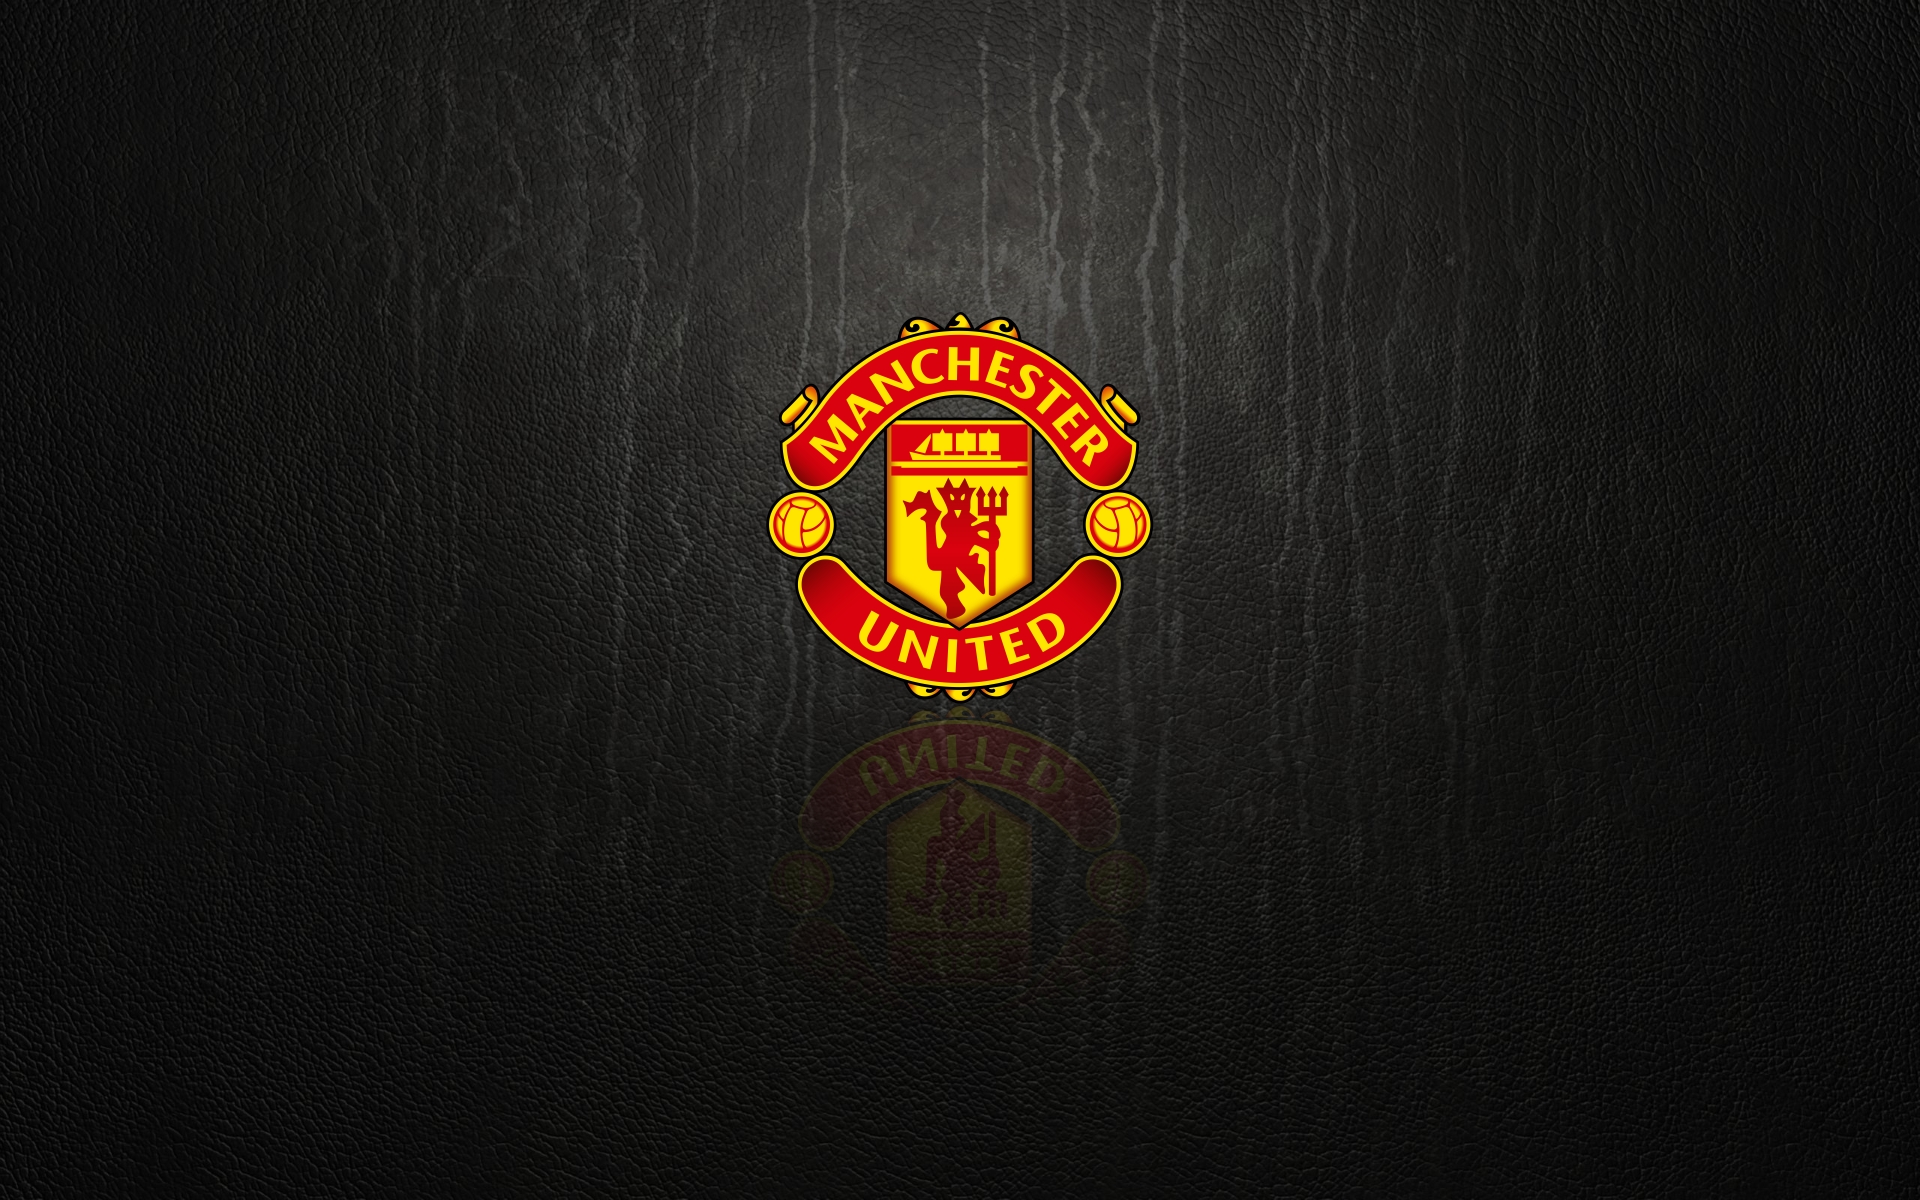 Manchester United Logo wallpaper free download HD